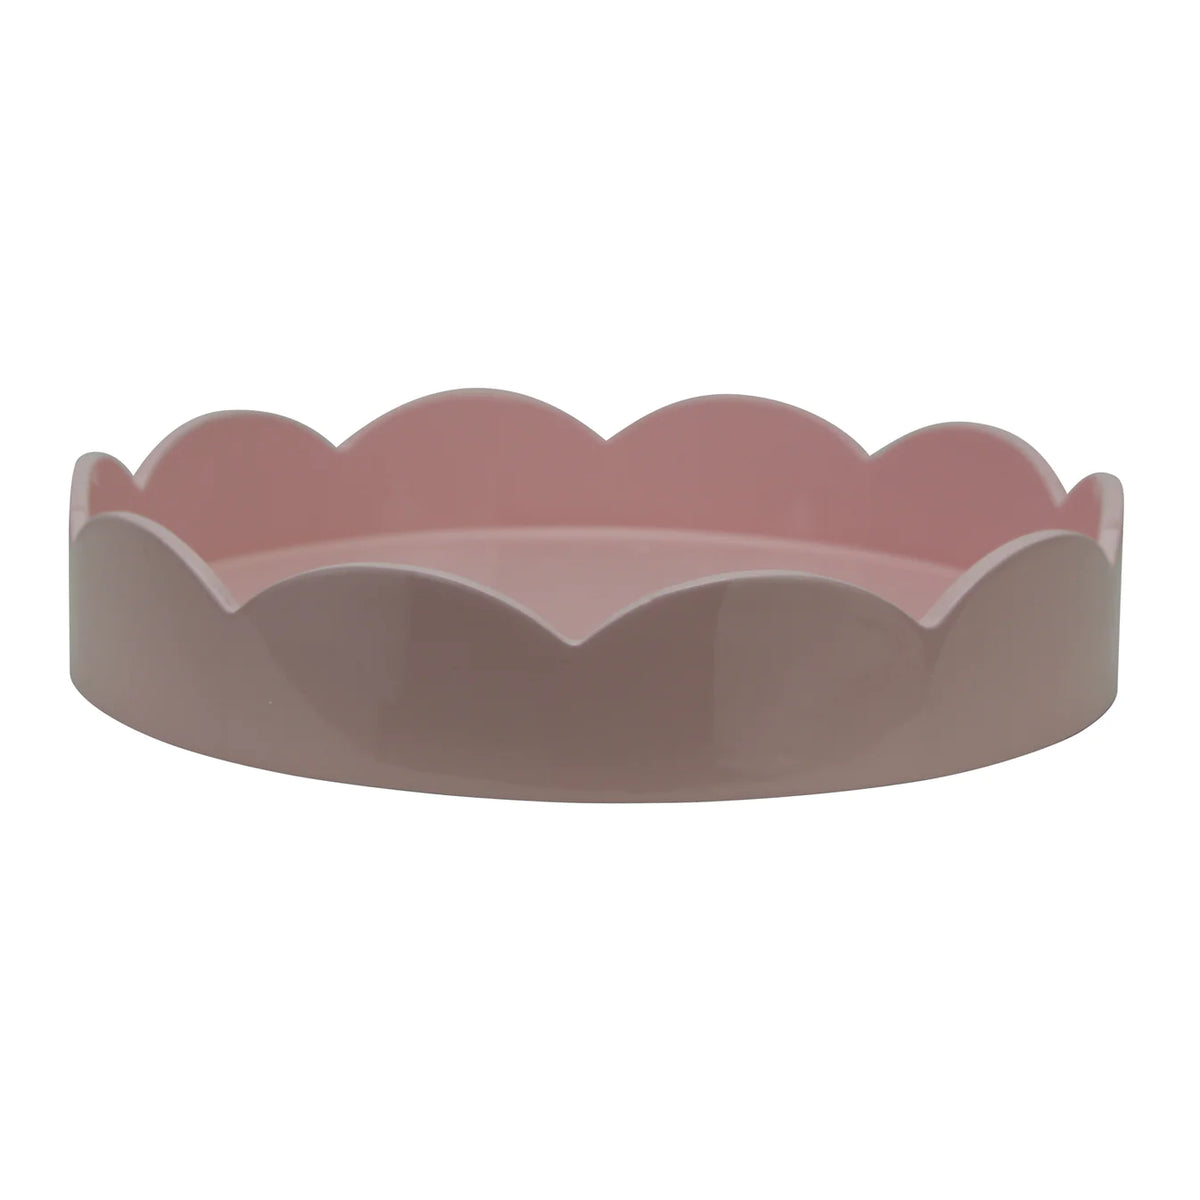 Round Scallop Lacquer Tray in Pale Pink - The Preppy Bunny